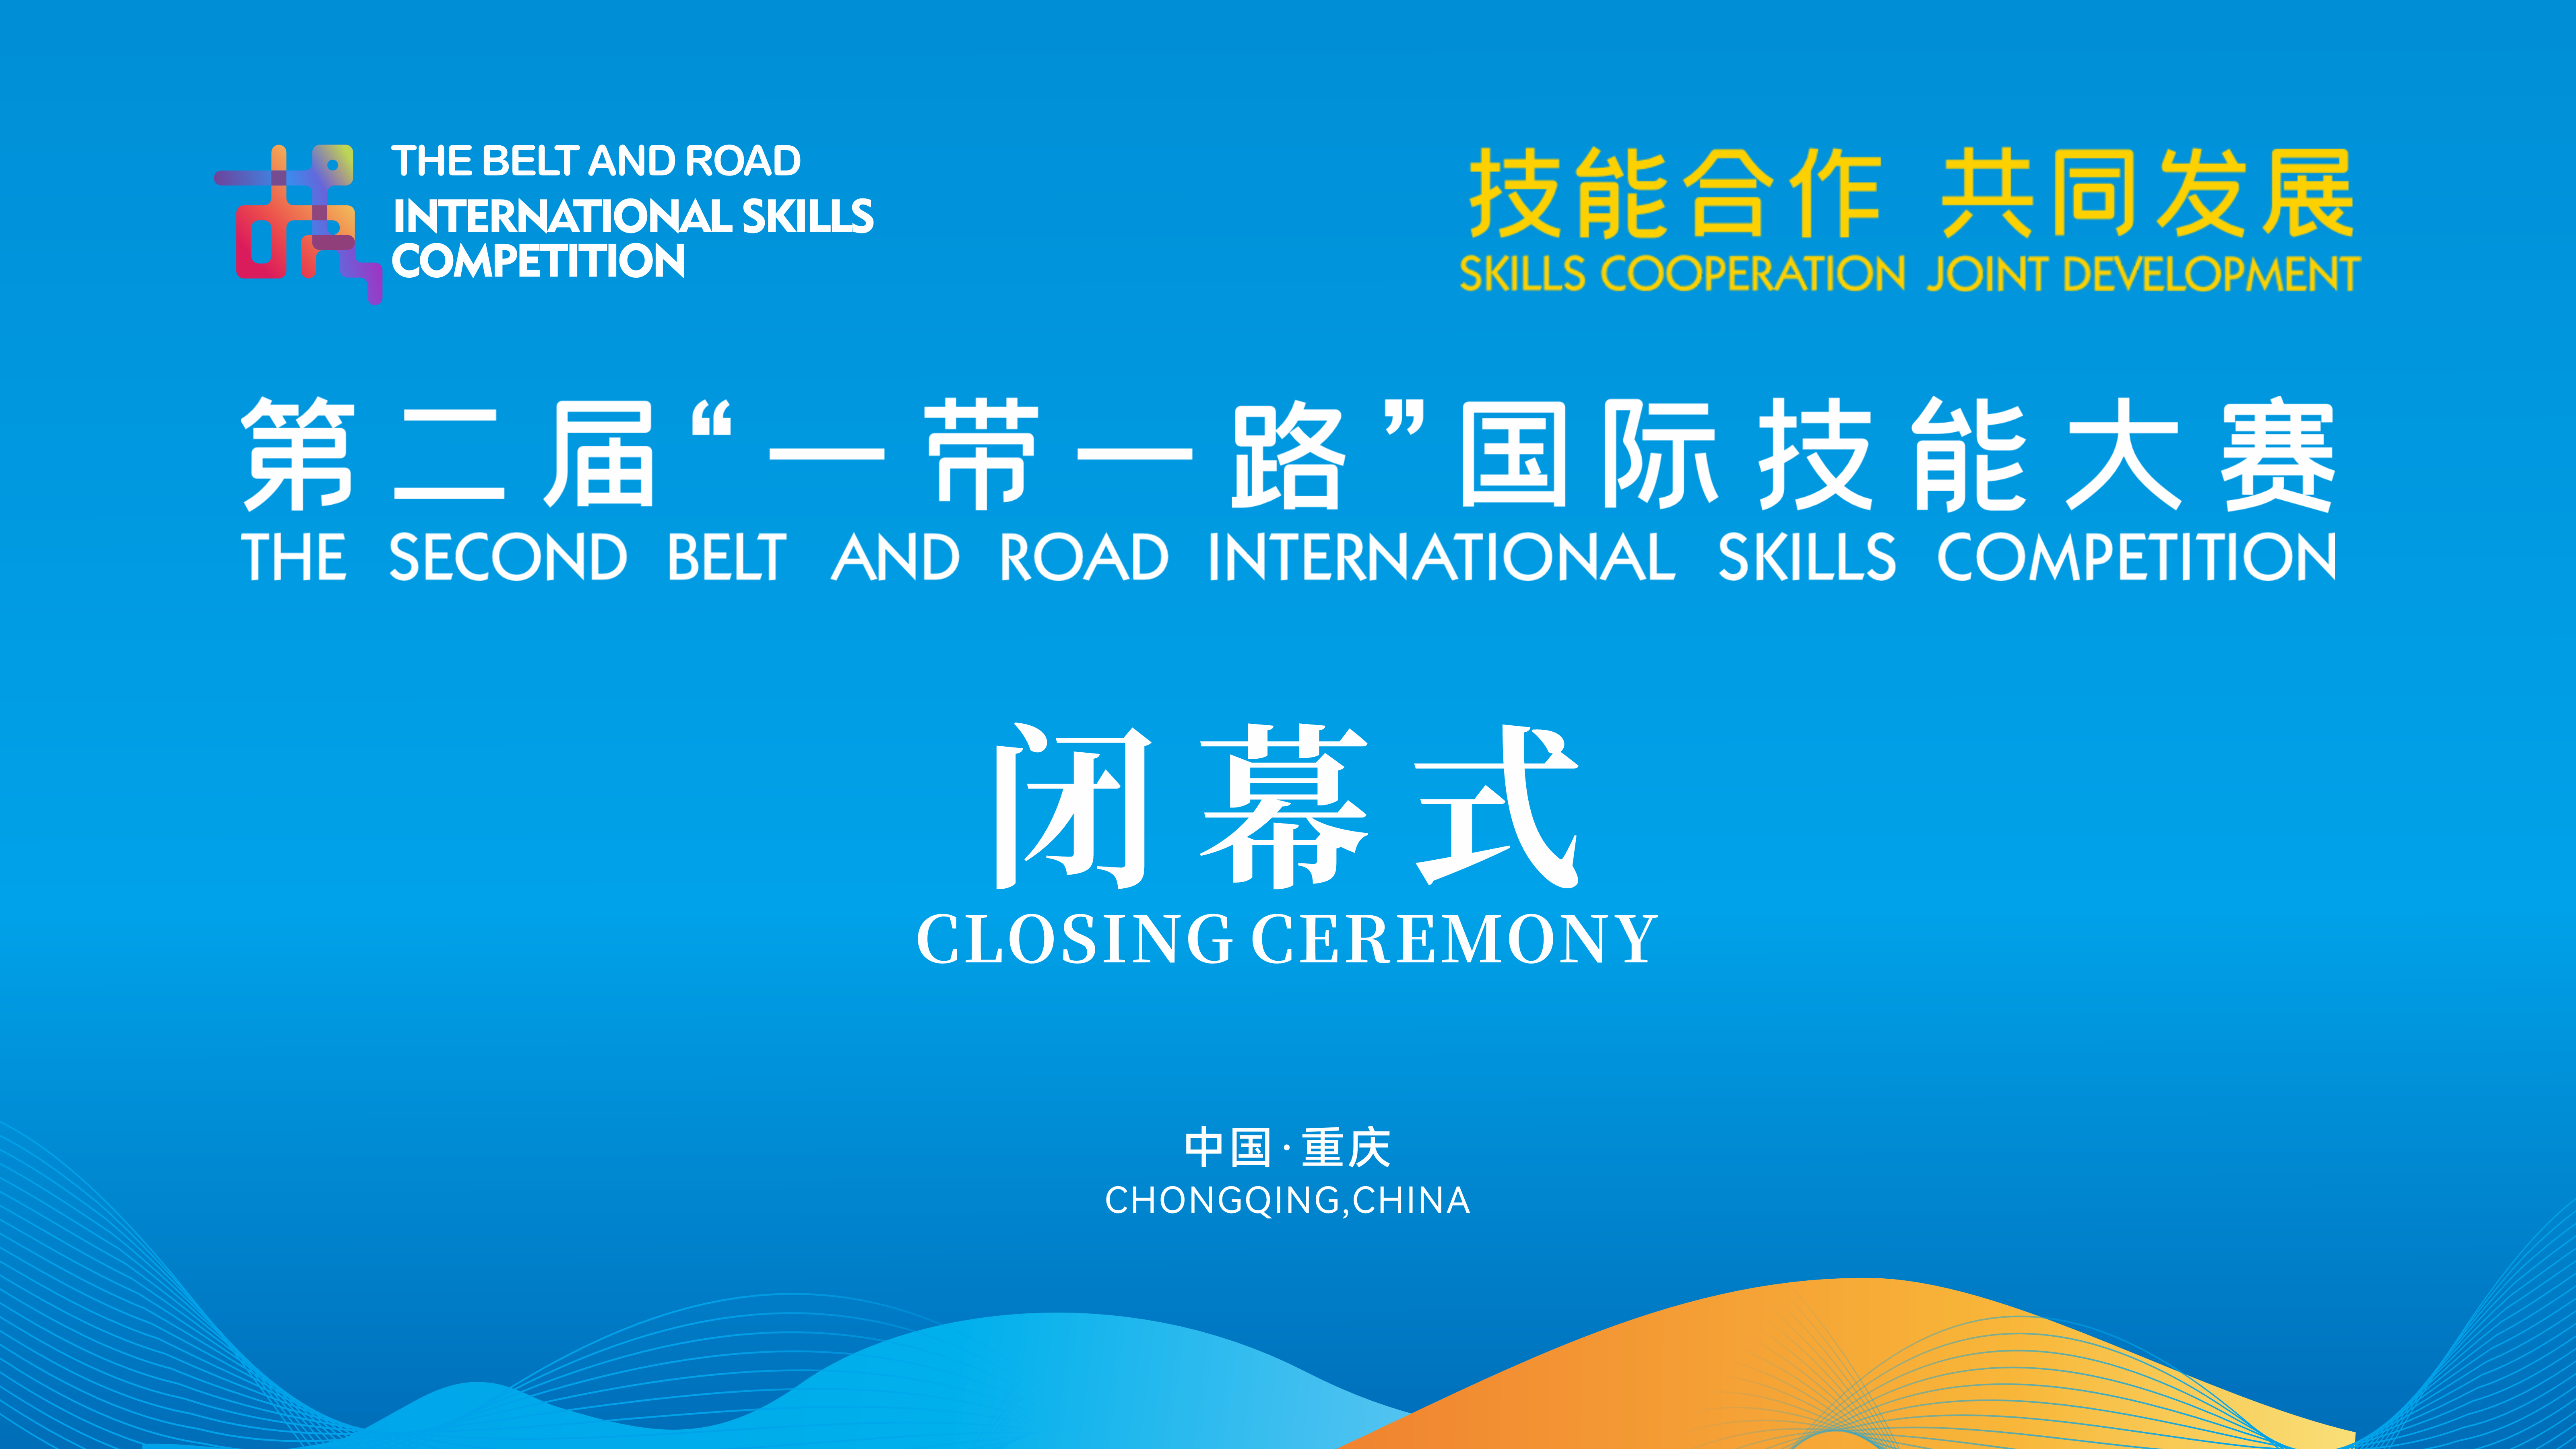 Watch: Closing ceremony of 2nd Belt and Road International Skills Competition